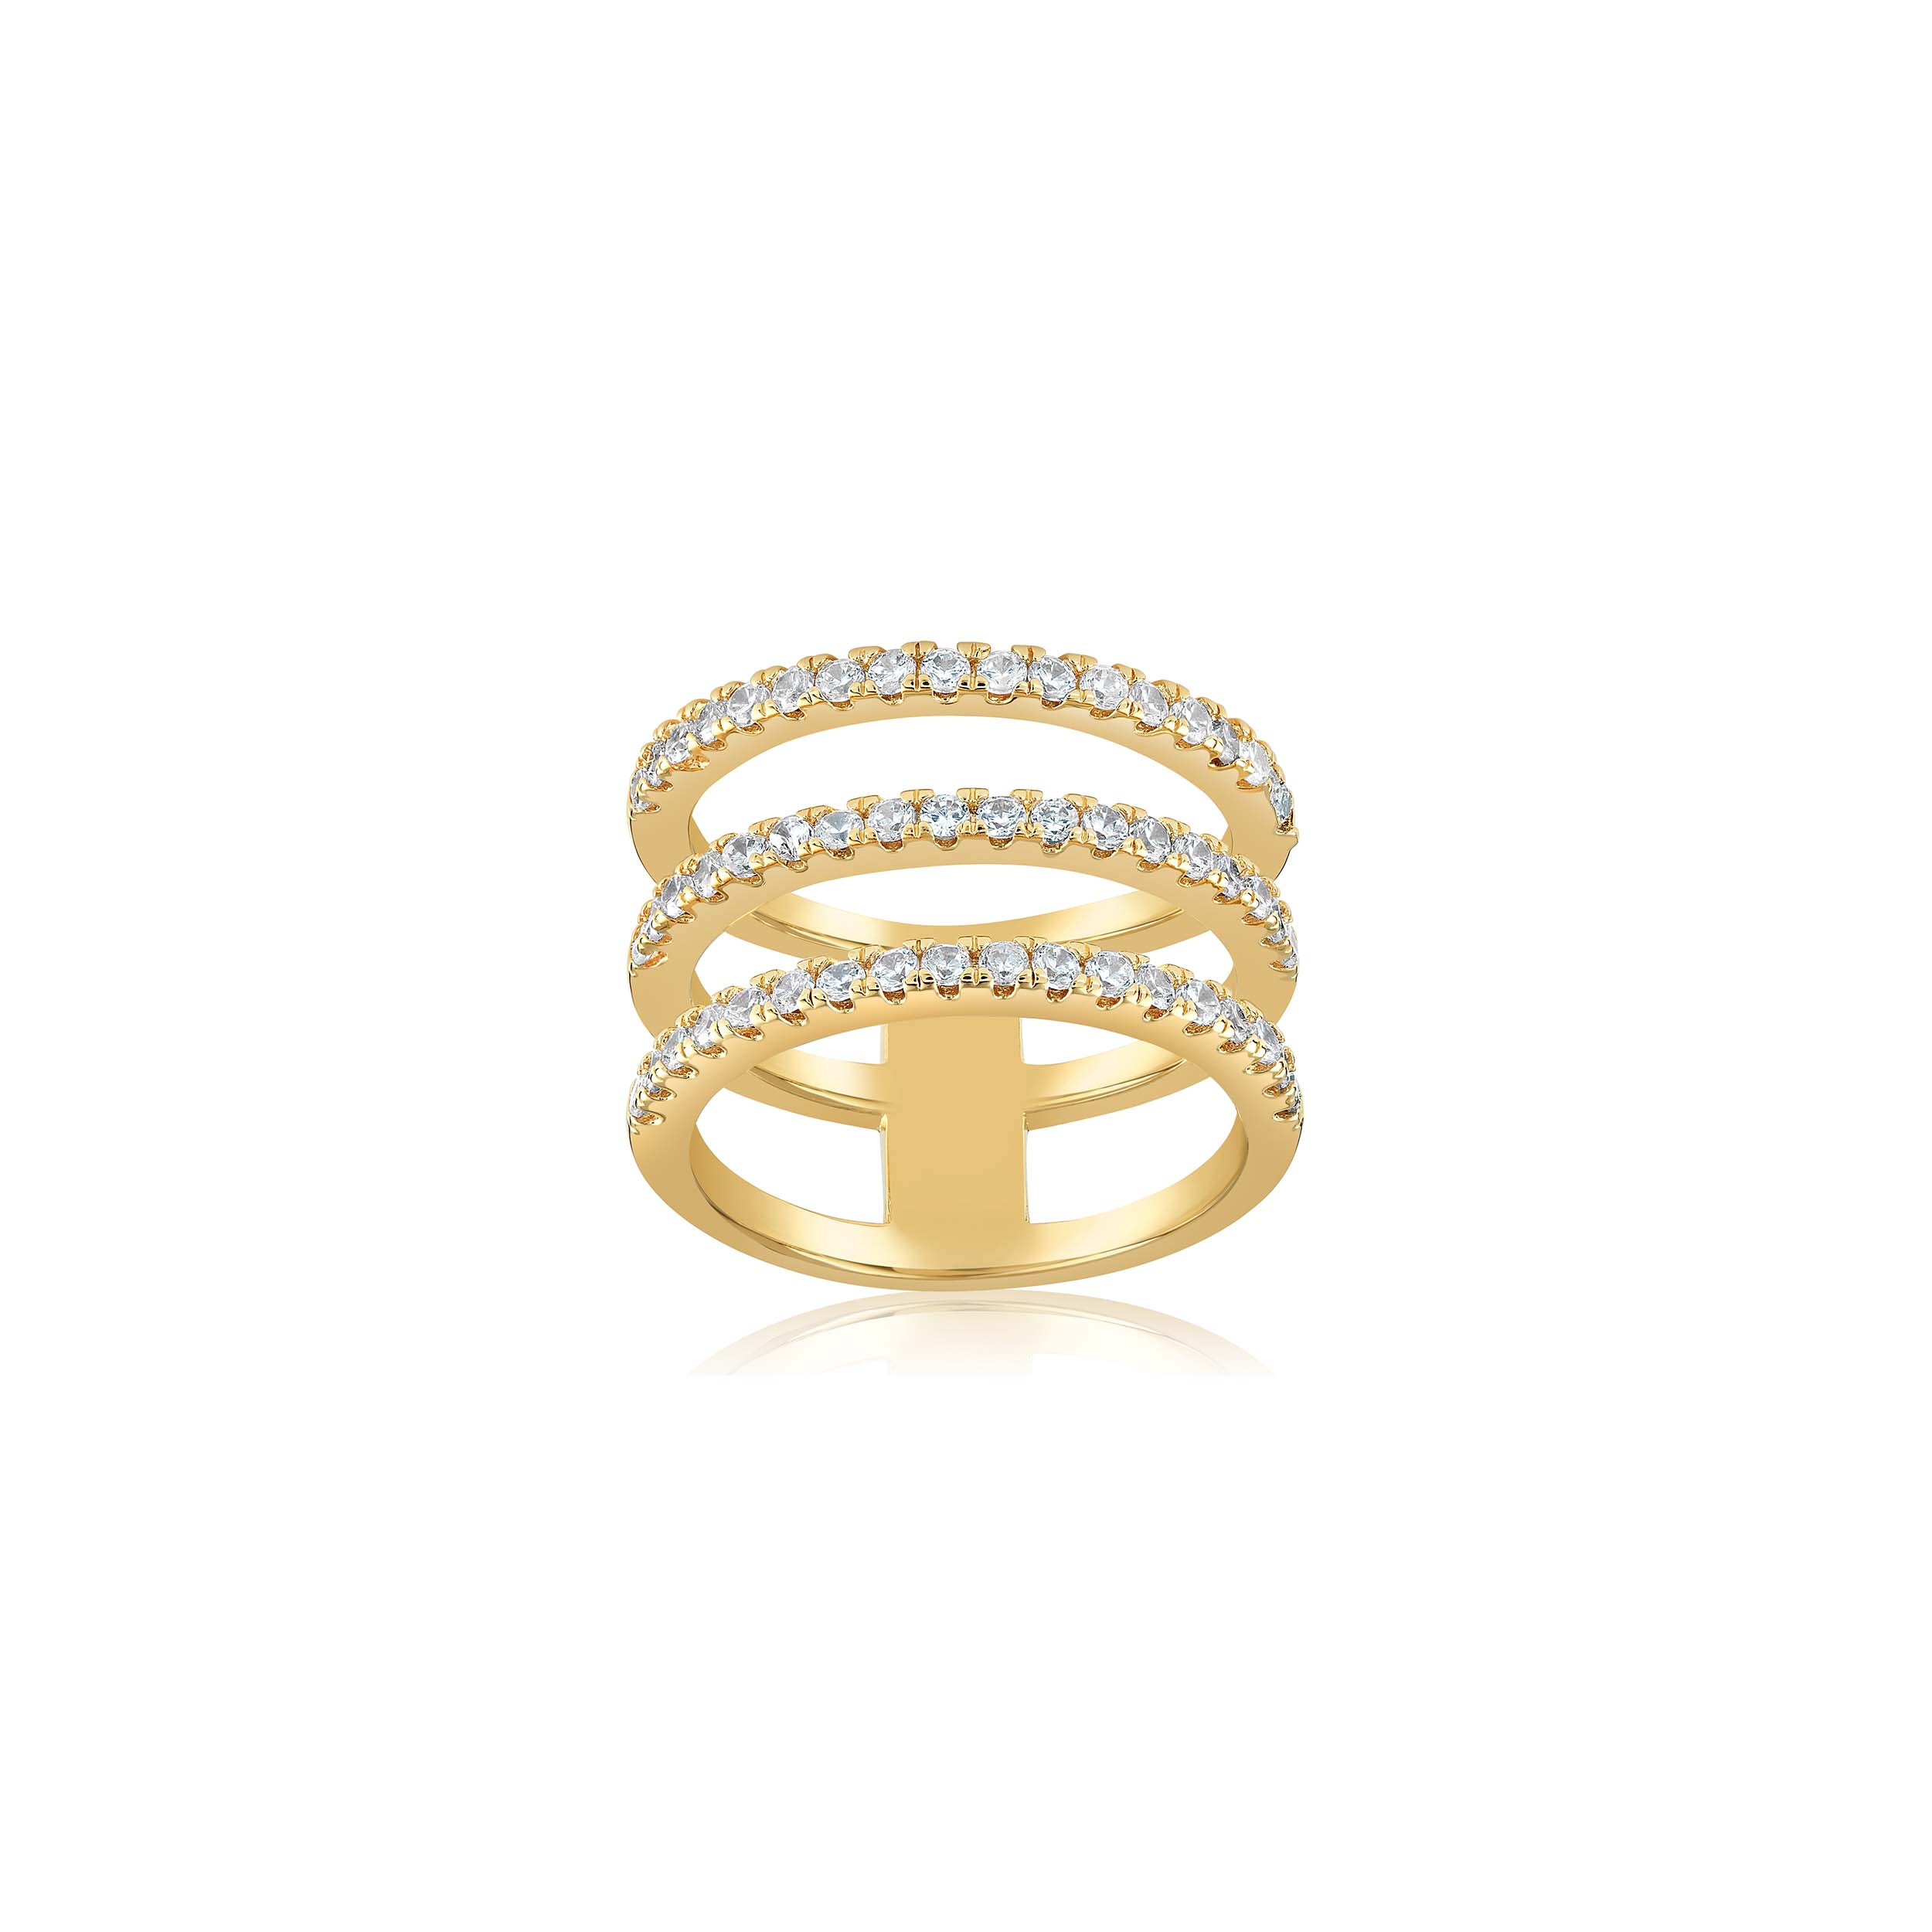 TRIO PAVE BAND RING - CLEAR